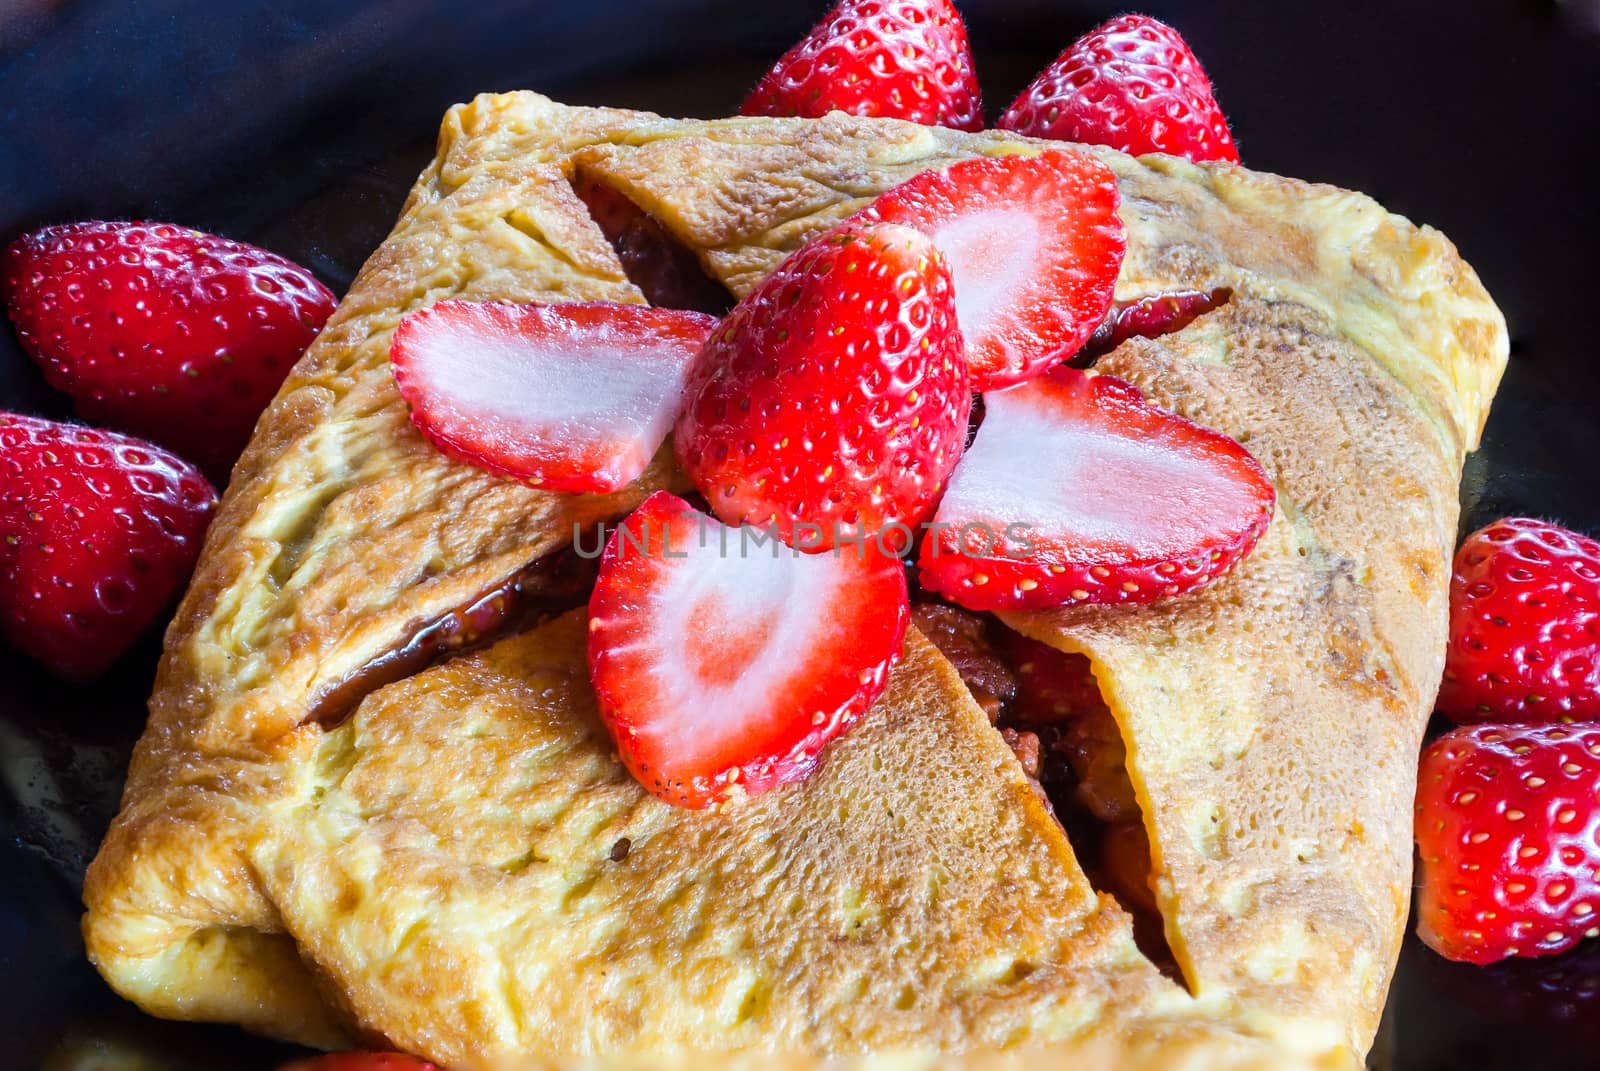 Strawberry Omelette from Northern Thailand.